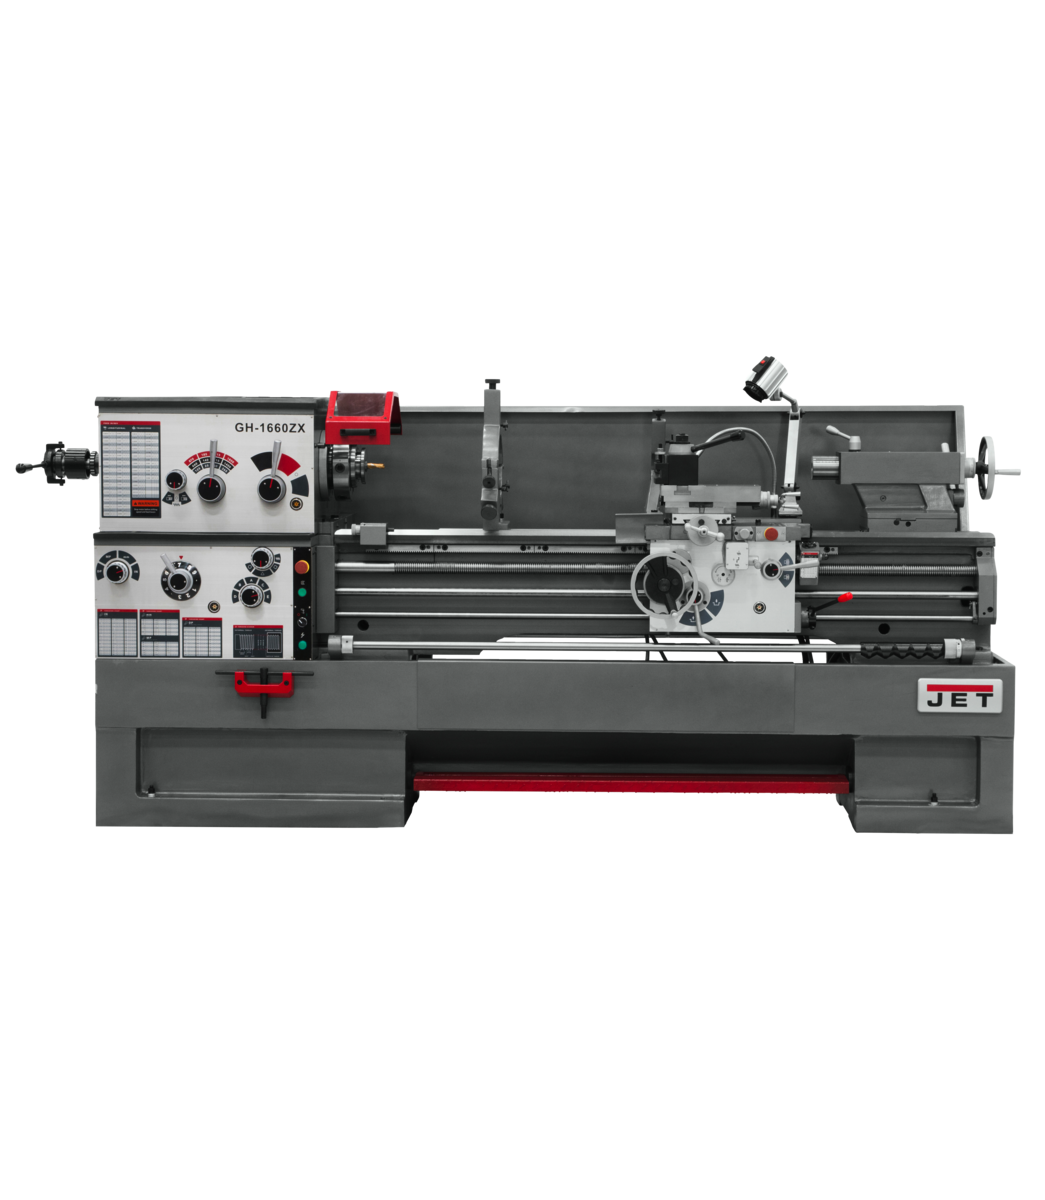 321544, GH-1660ZX Lathe with Taper Attachment and Collet Closer Installed, Jet, Metalworking, Turning, Lathes